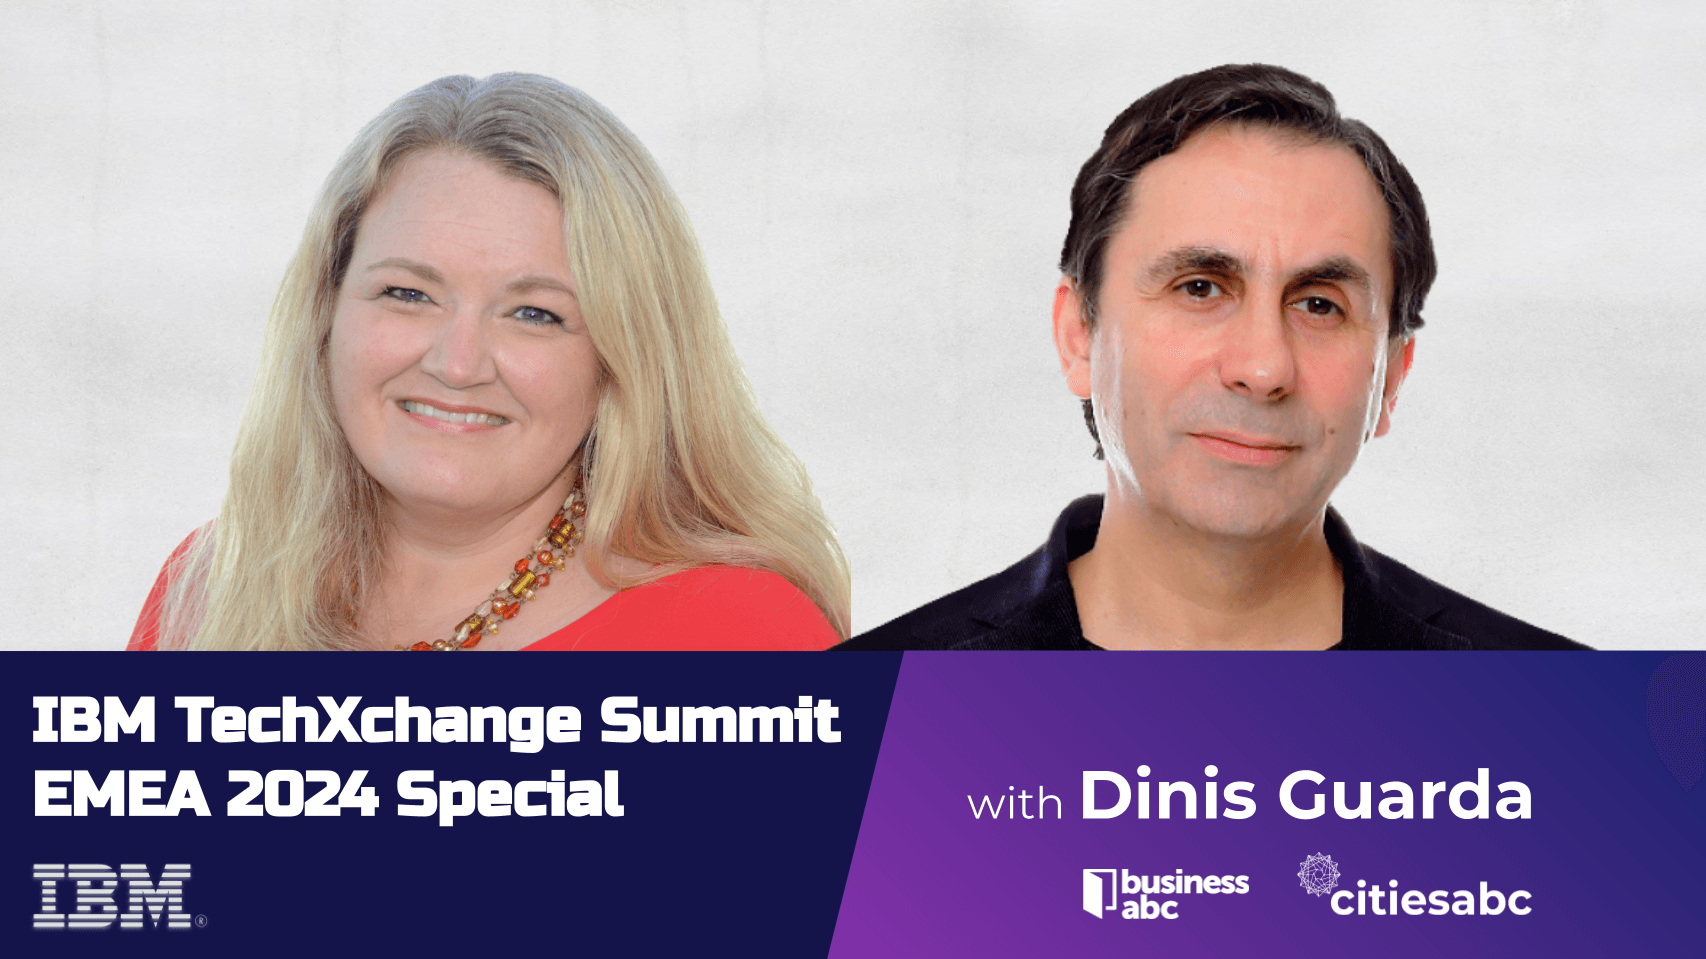 IBM TechXchange Summit: Dawn Herndon Talks About Partner Ecosystem And AI Innovations With Dinis Guarda